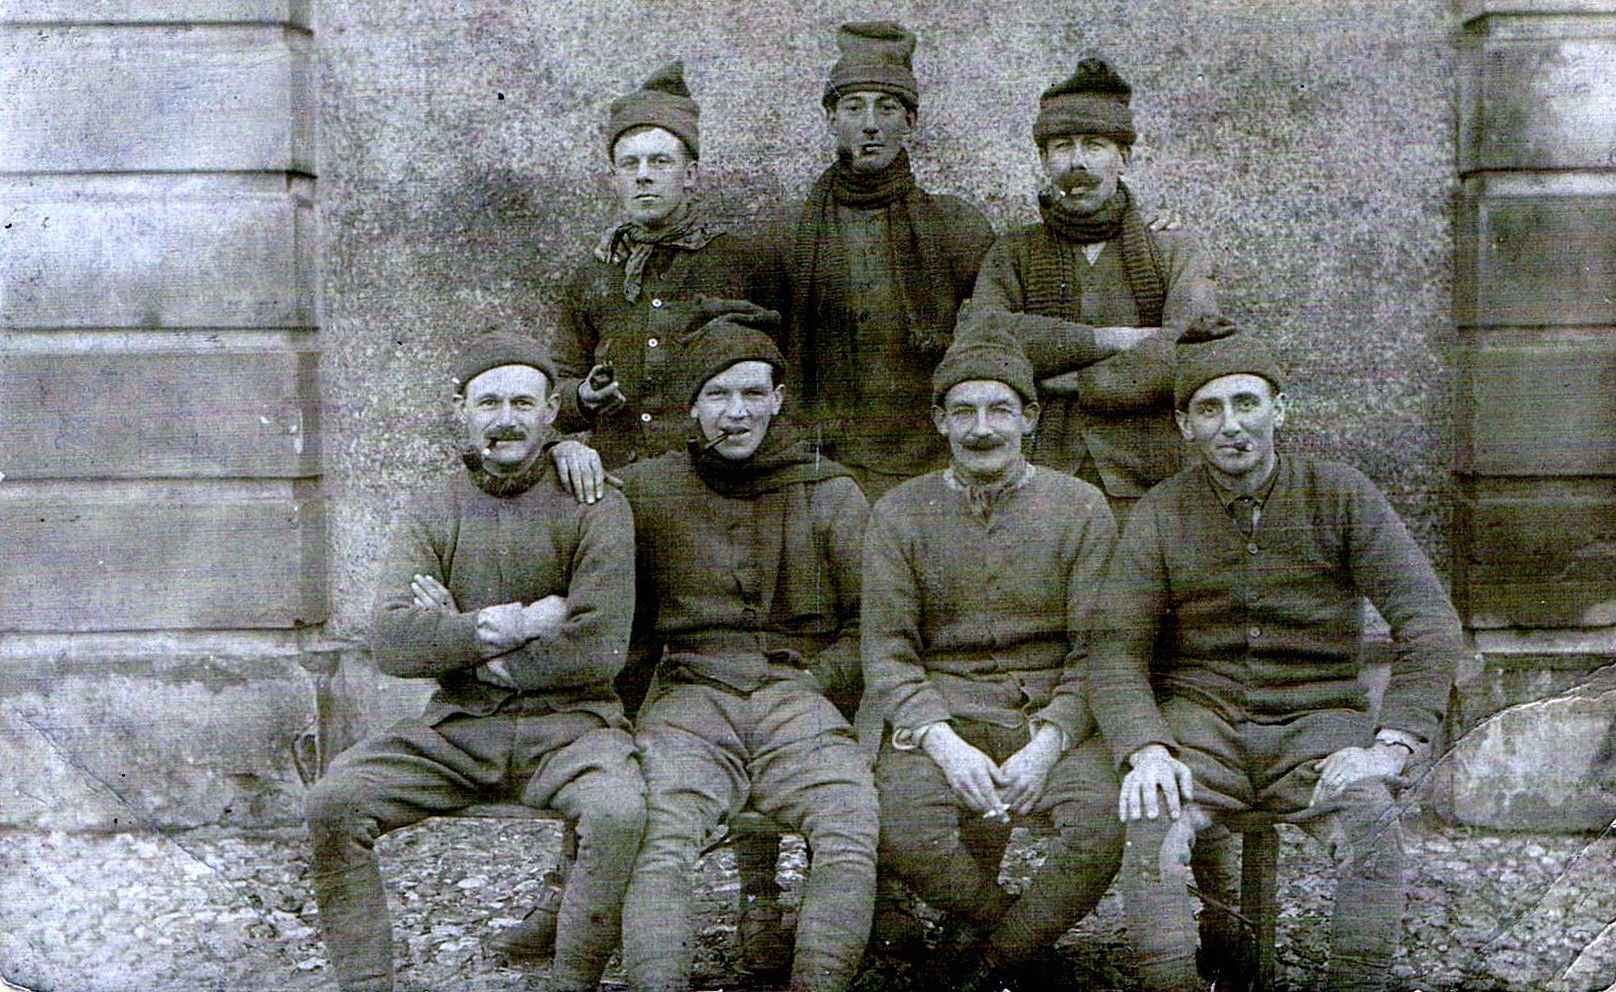 BROWN, . Lance Corporal. Named as the left hand figure in the back row in a postcard which belonged to Private Broadshaw taken at Watford in 1914 with fellow members of 2nd Troop, C Squadron. Could be George William Farrer Brown, 1080 or Orlando Moray Brown, 682. Postcard notes he enlisted from Mexico, courtesy of Stuart Shaw (relative of Private Broadhead).).